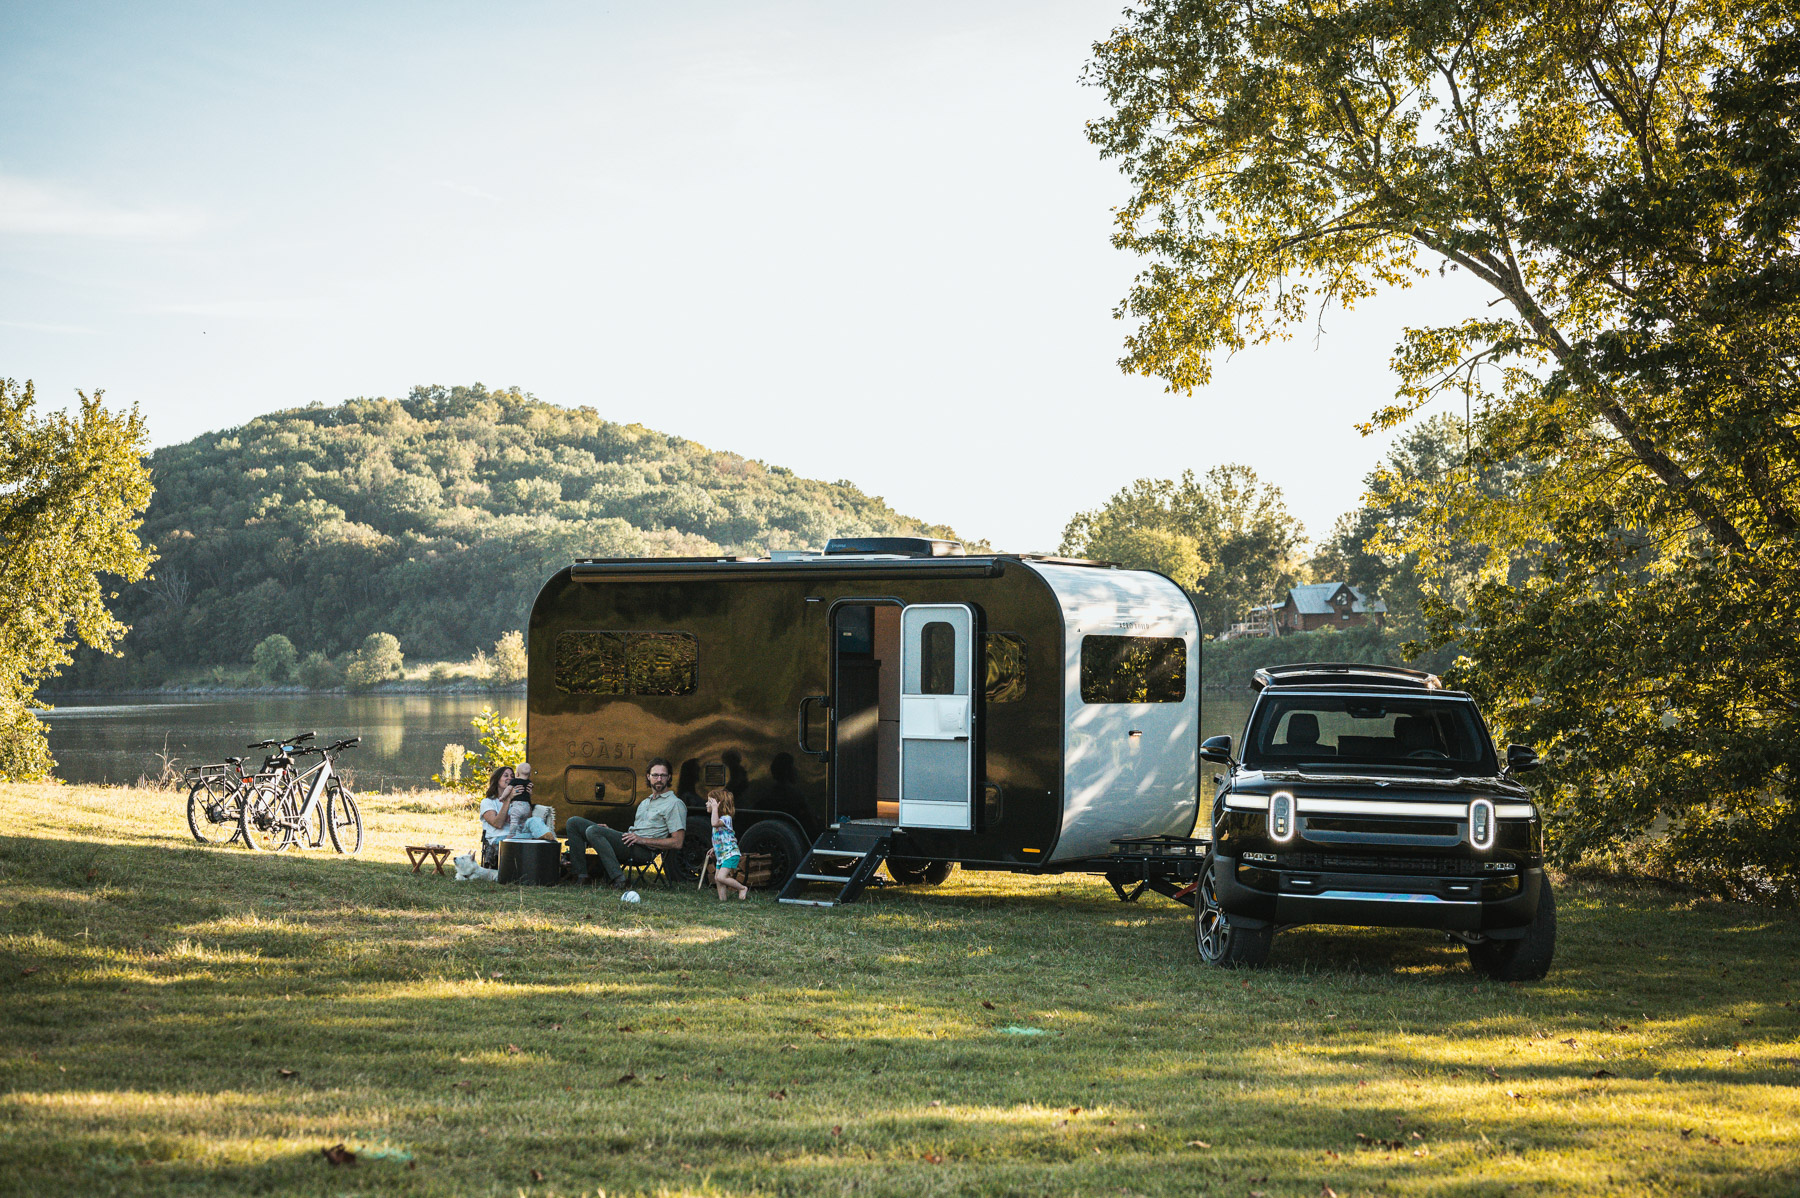 Aero Build's Coast Model 1 Sets the New Standard for Luxury Travel Coast by Aero Build Debuts Comfort to Off-Grid Travel